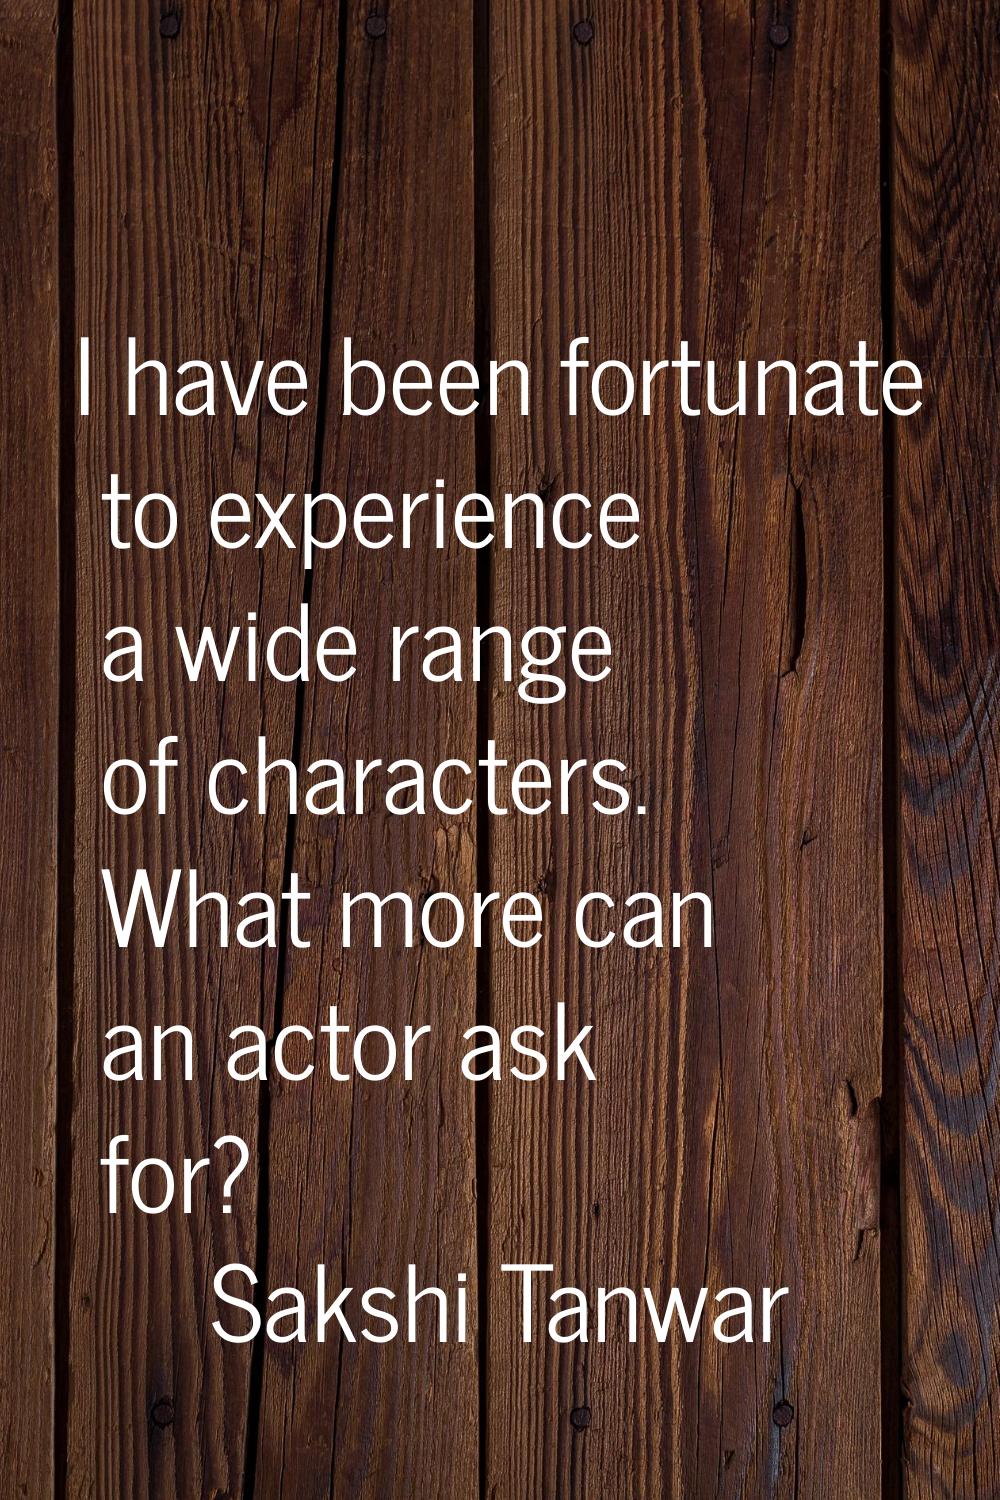 I have been fortunate to experience a wide range of characters. What more can an actor ask for?